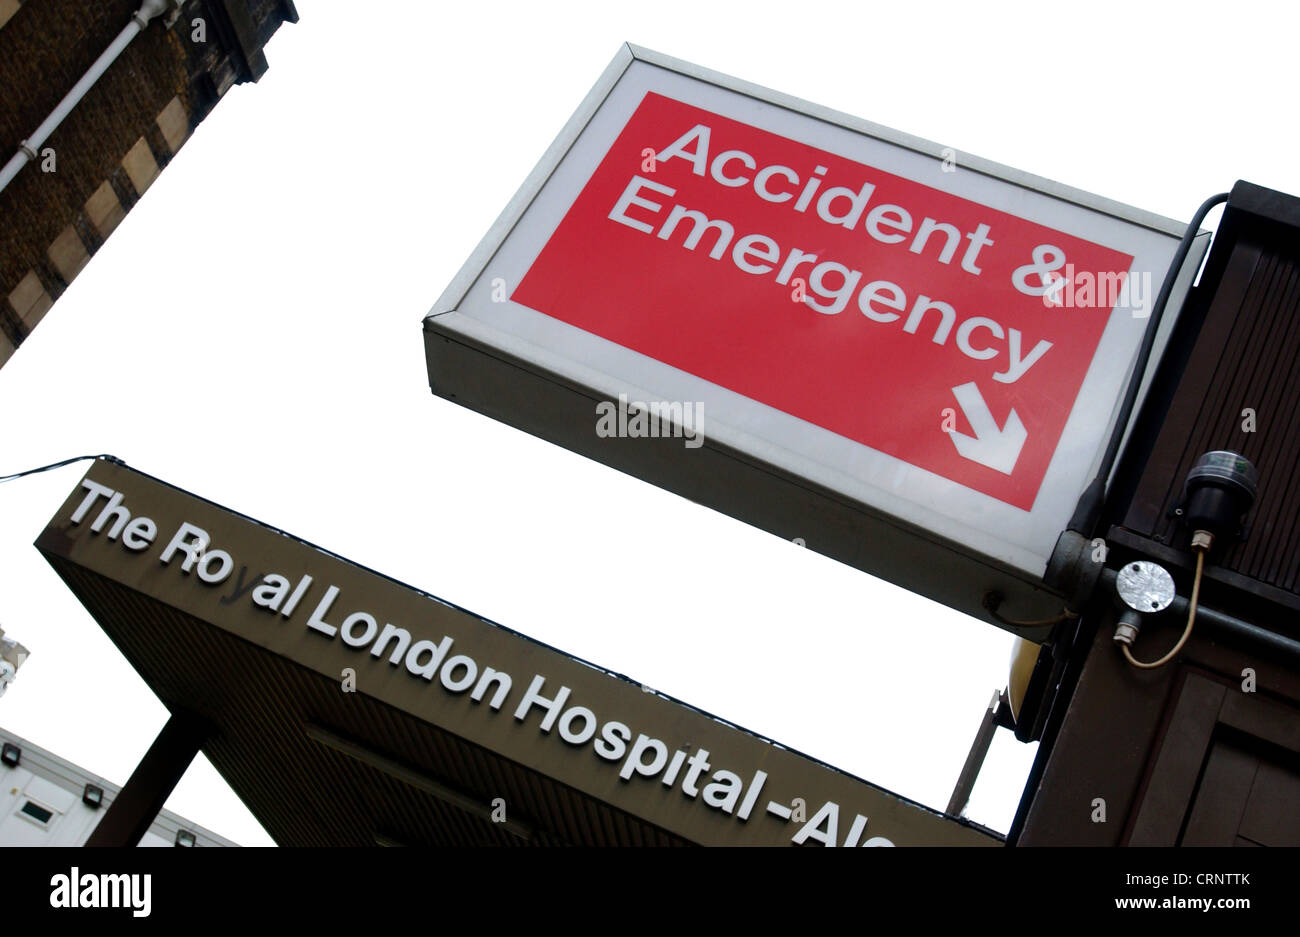 Accident & Emergency sign Stock Photo